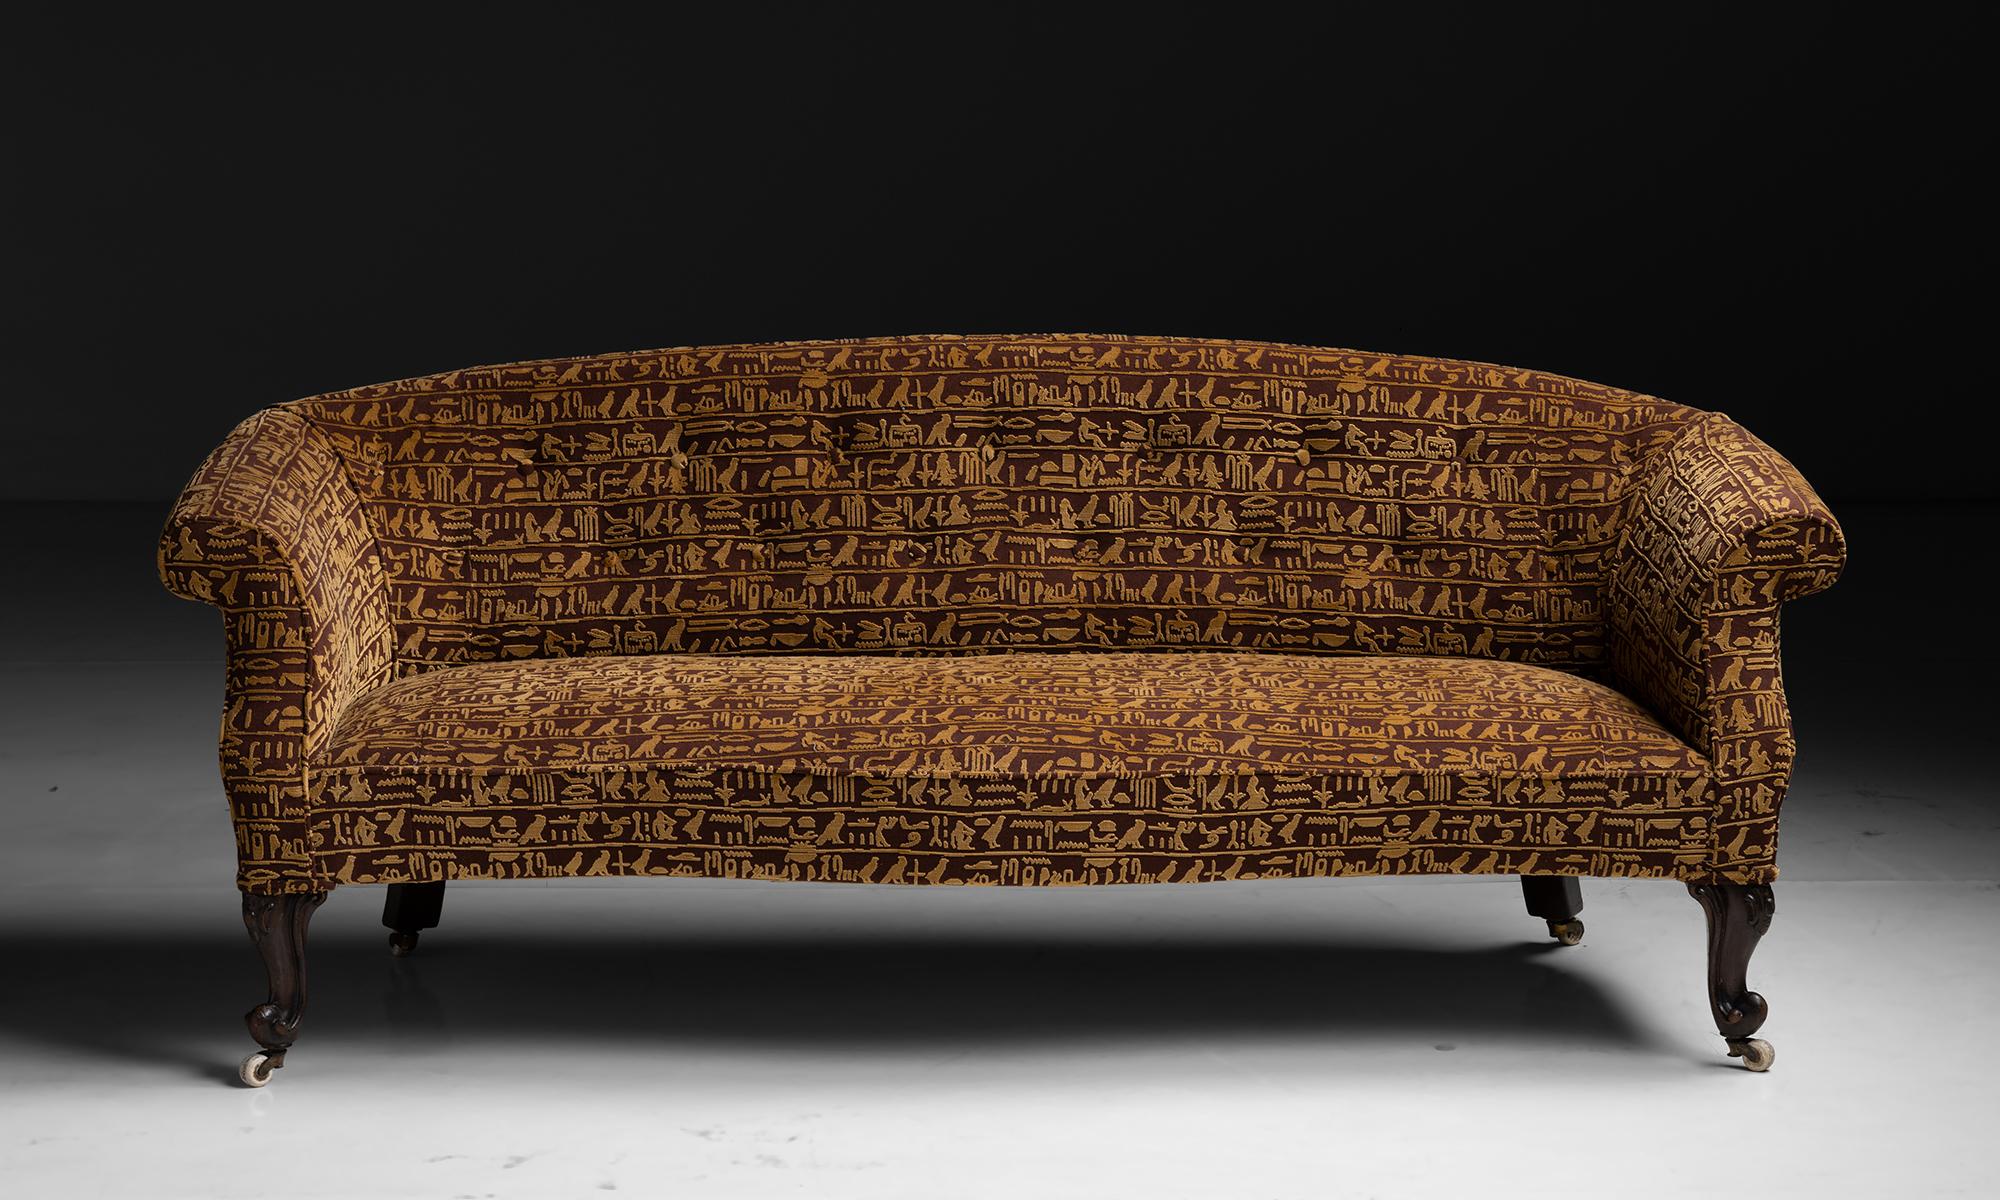 Camelback Sofa in Velvet Fabric by Pierre Frey

England circa 1860

Newly upholstered victorian sofa in hieroglyph velvet fabric.

Measures 77.25”L x 30”d x 31”h x 16”seat